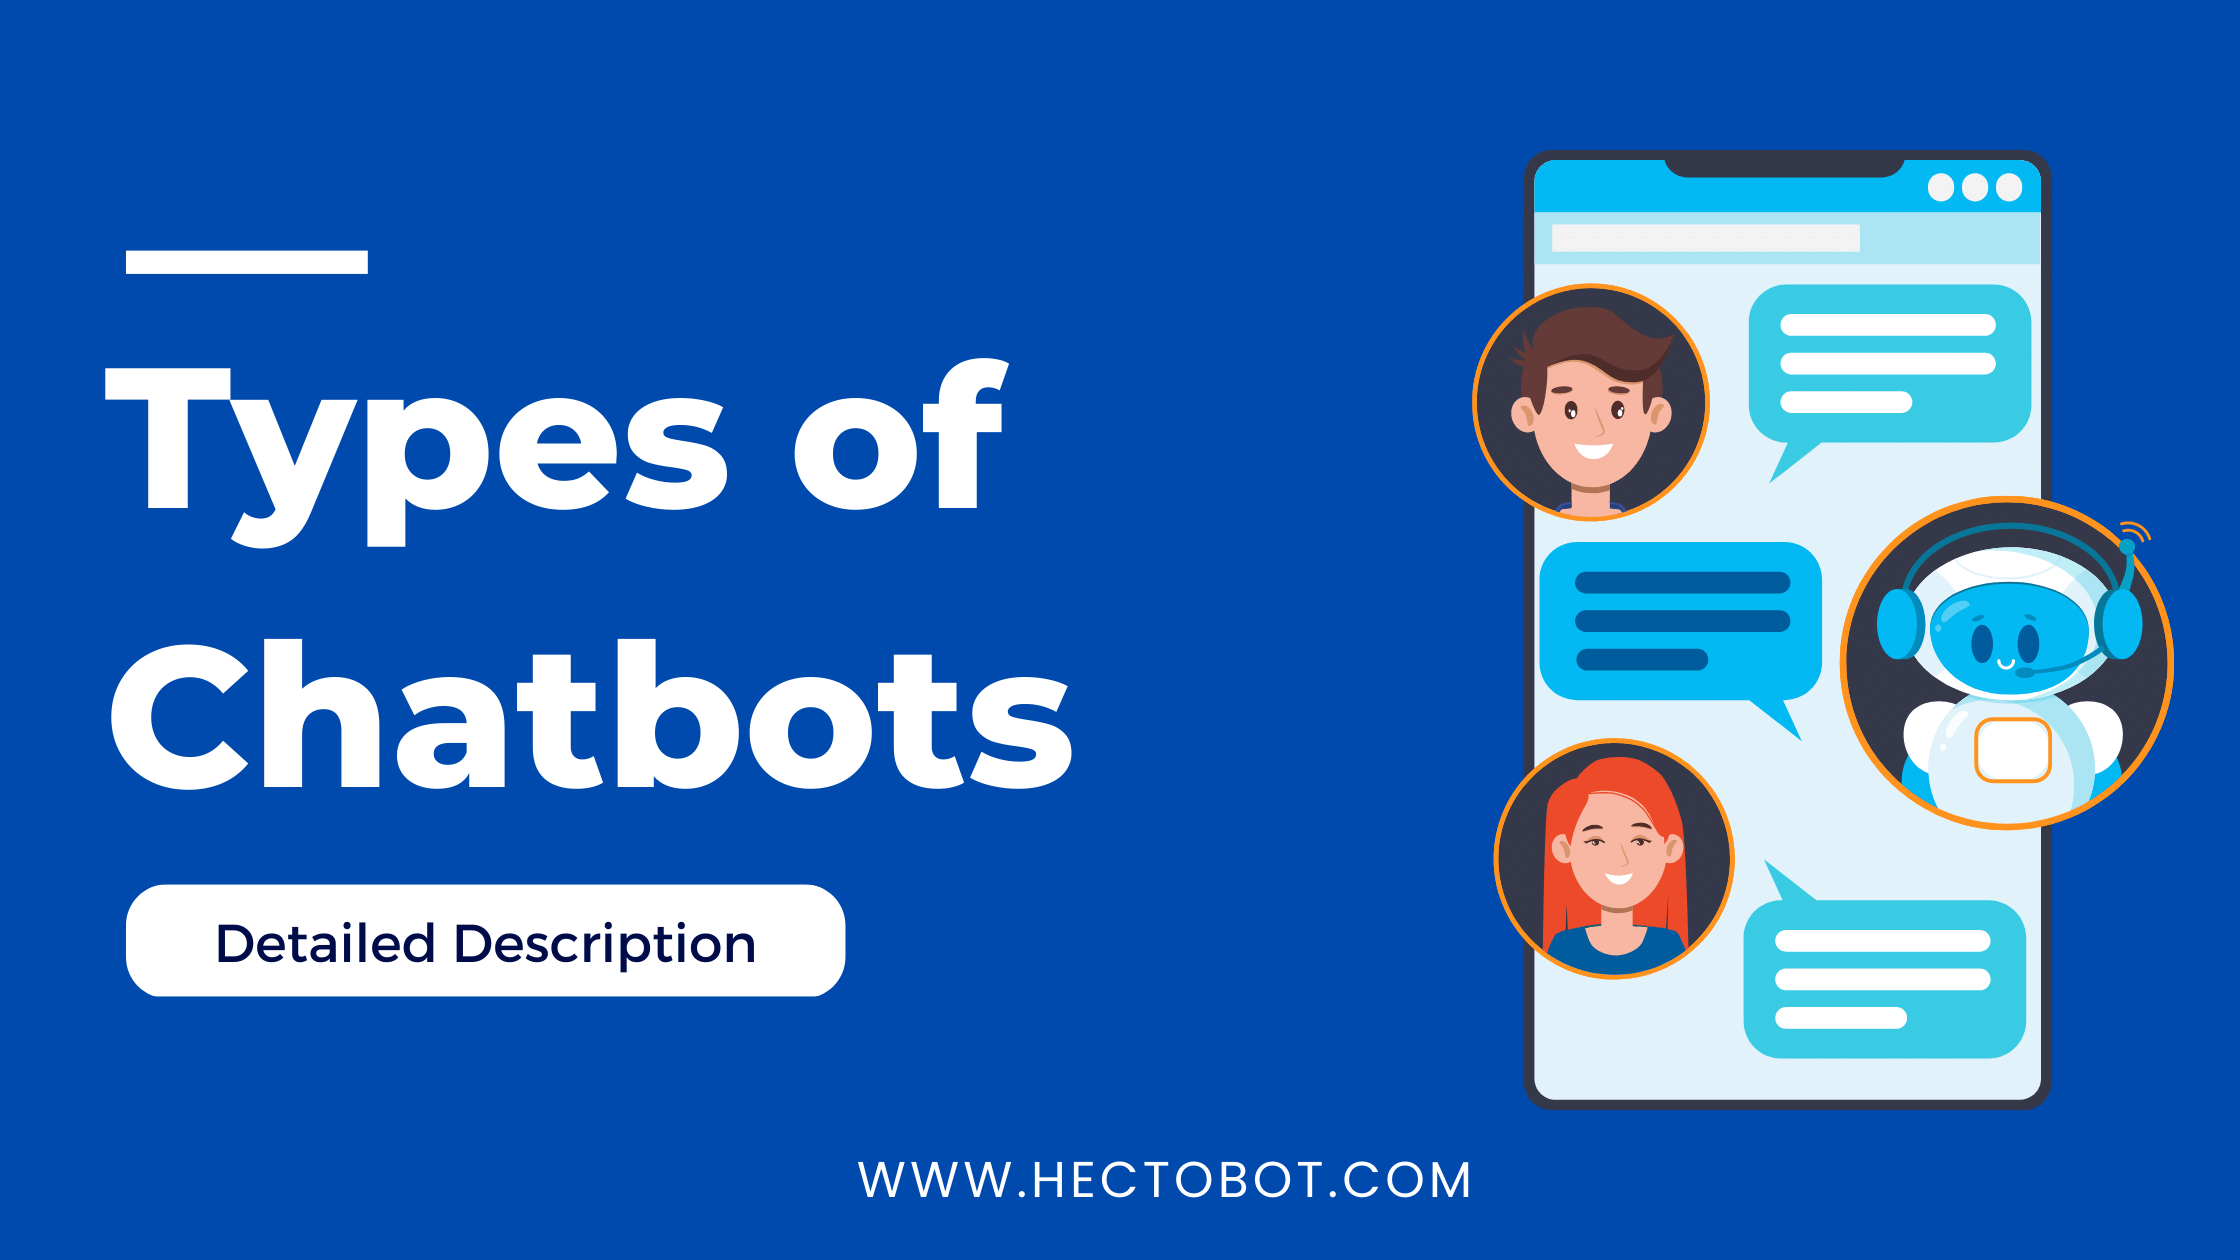 Types of Chatbots